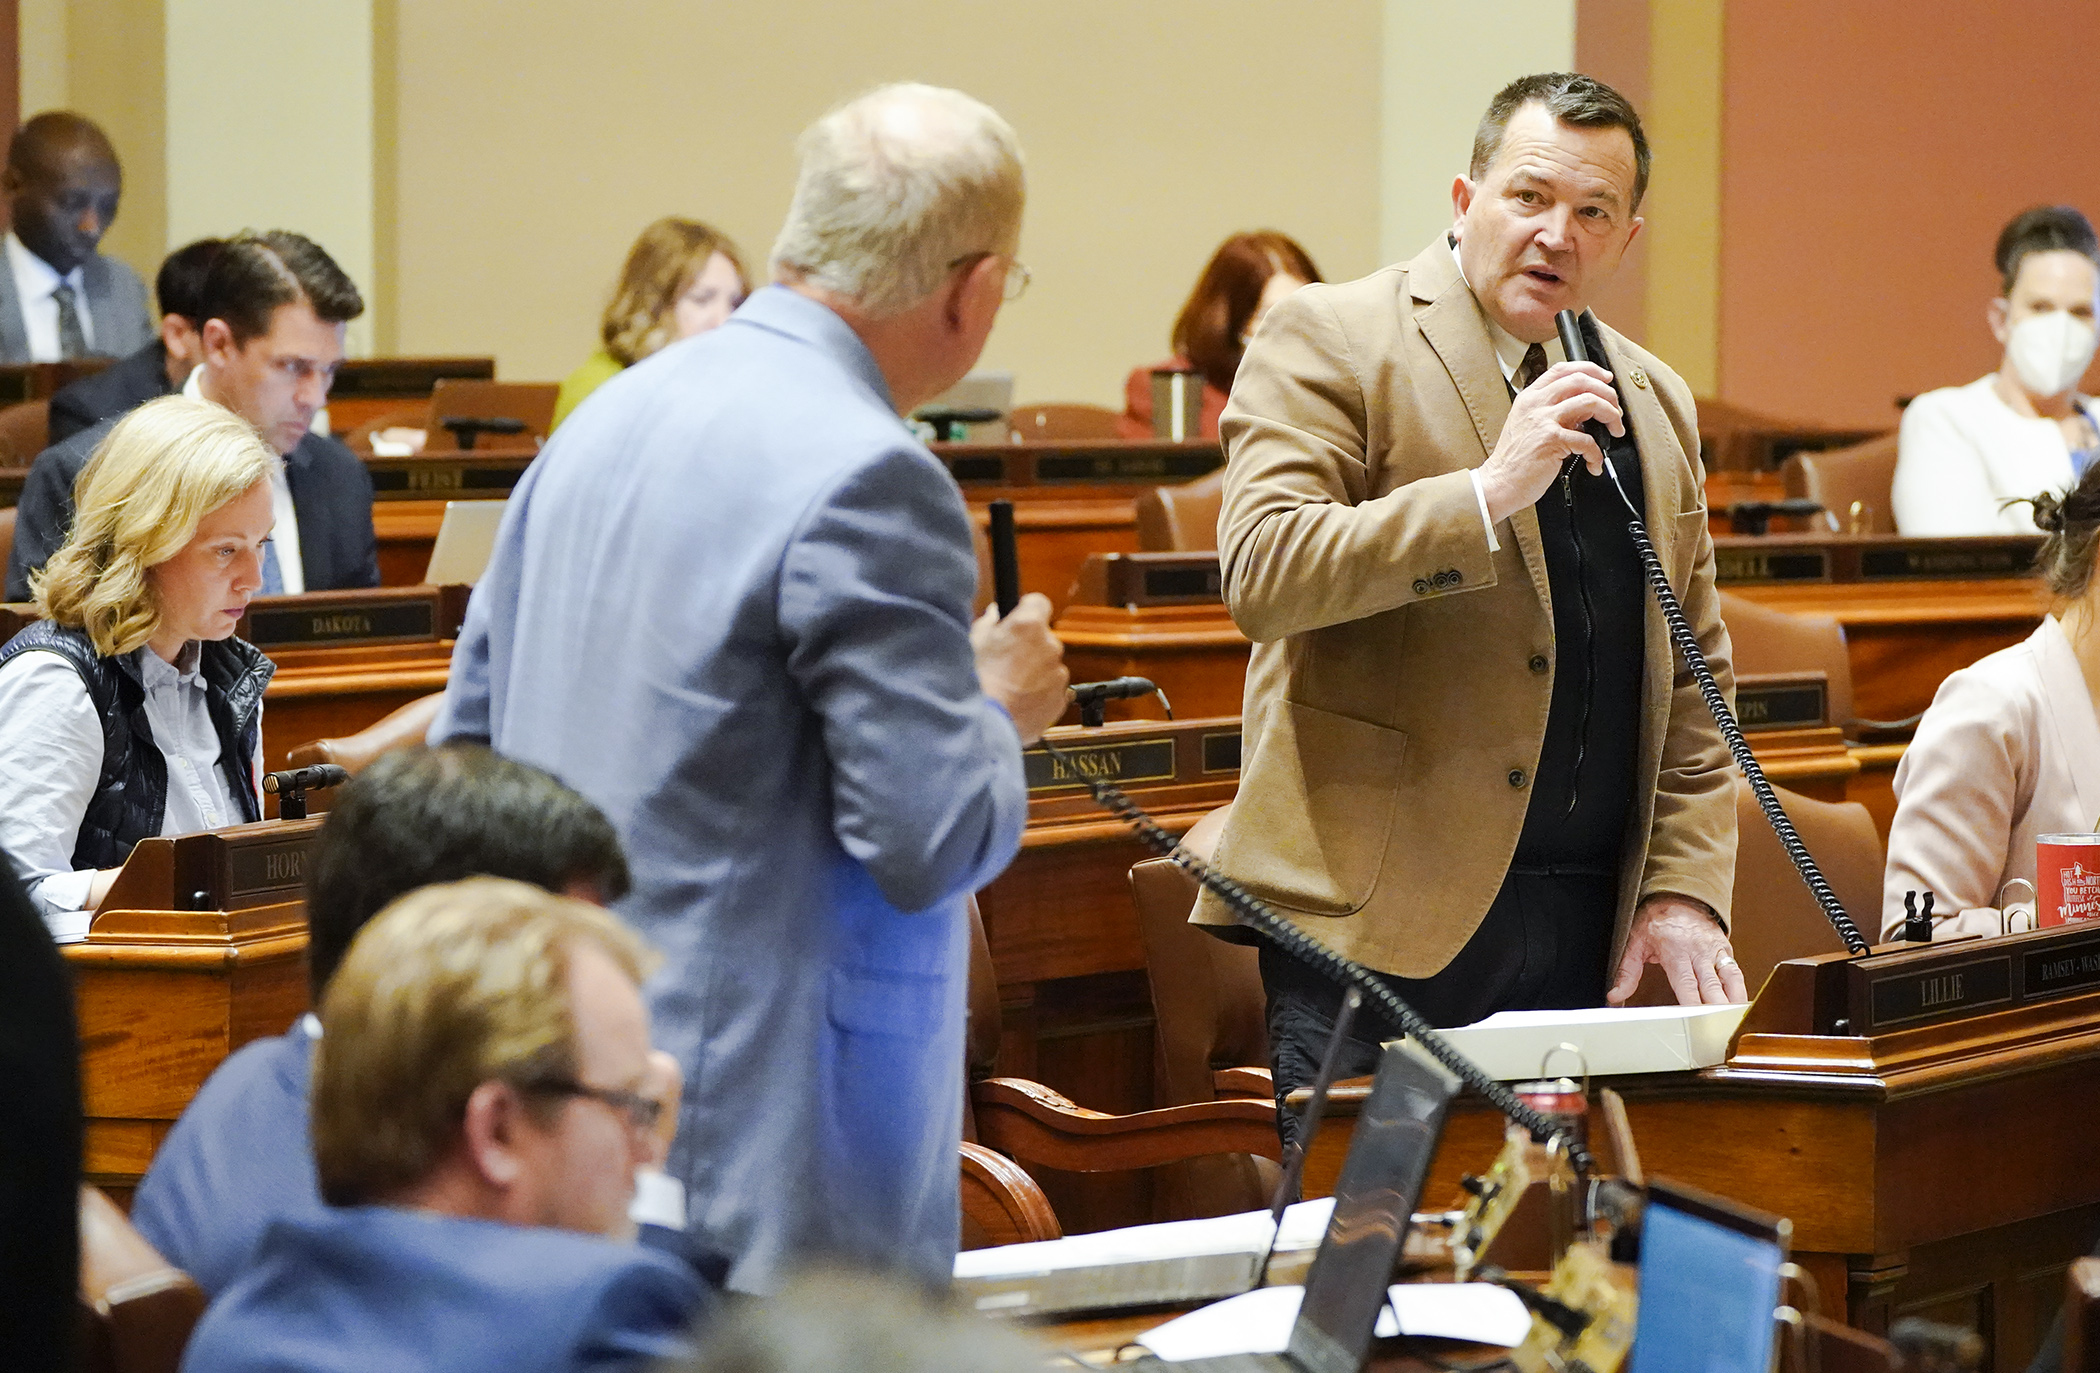 Rep. Leon Lillie, chair of the House Legacy Finance Committee, answers a question from Rep. Dean Urdahl during debate on the omnibus Legacy finance bill April 25. The bill passed on a 70-62 vote. (Photo by Paul Battaglia)